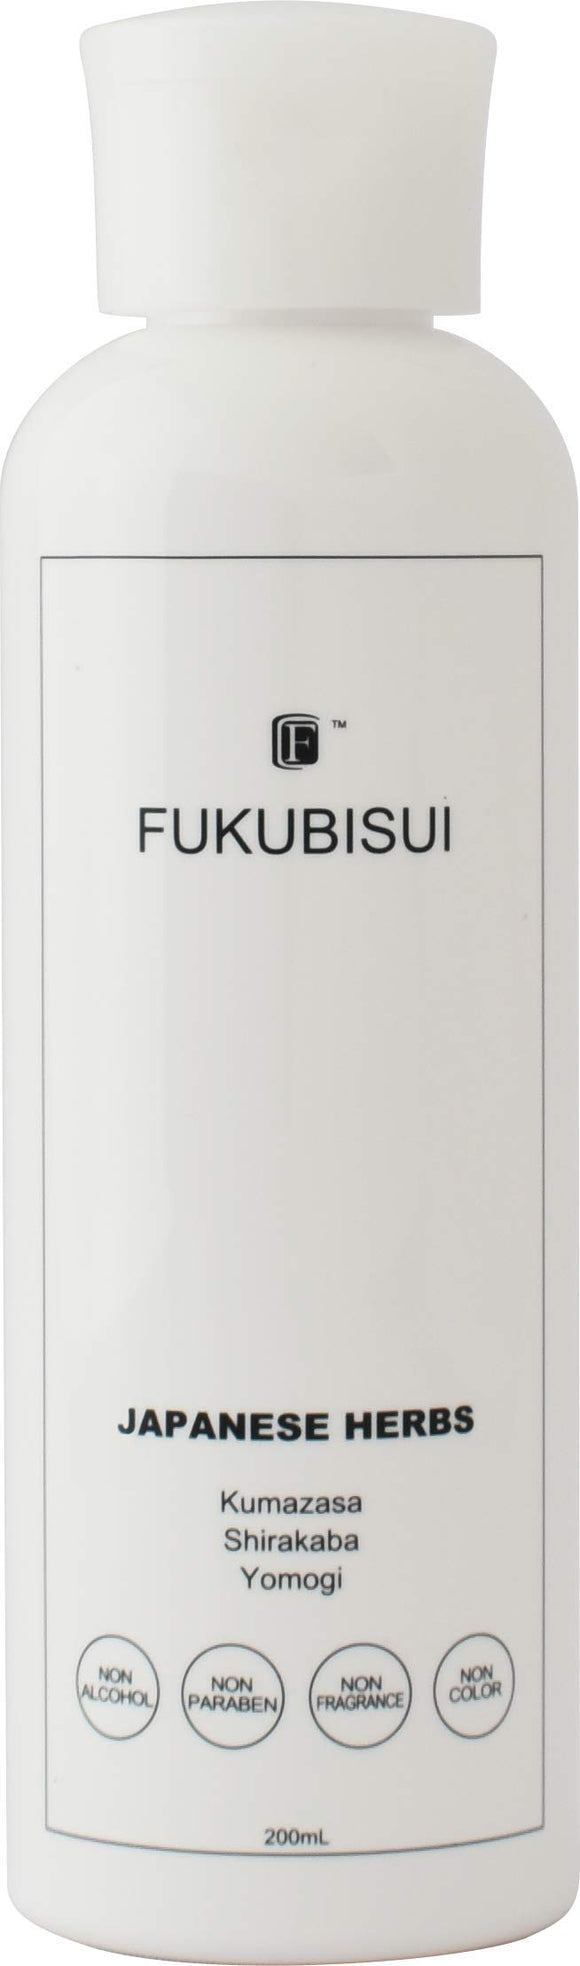 FUKUBISUI Facial Body Lotion with Plant Extract, Pump Type, 6.8 fl oz (200 ml)